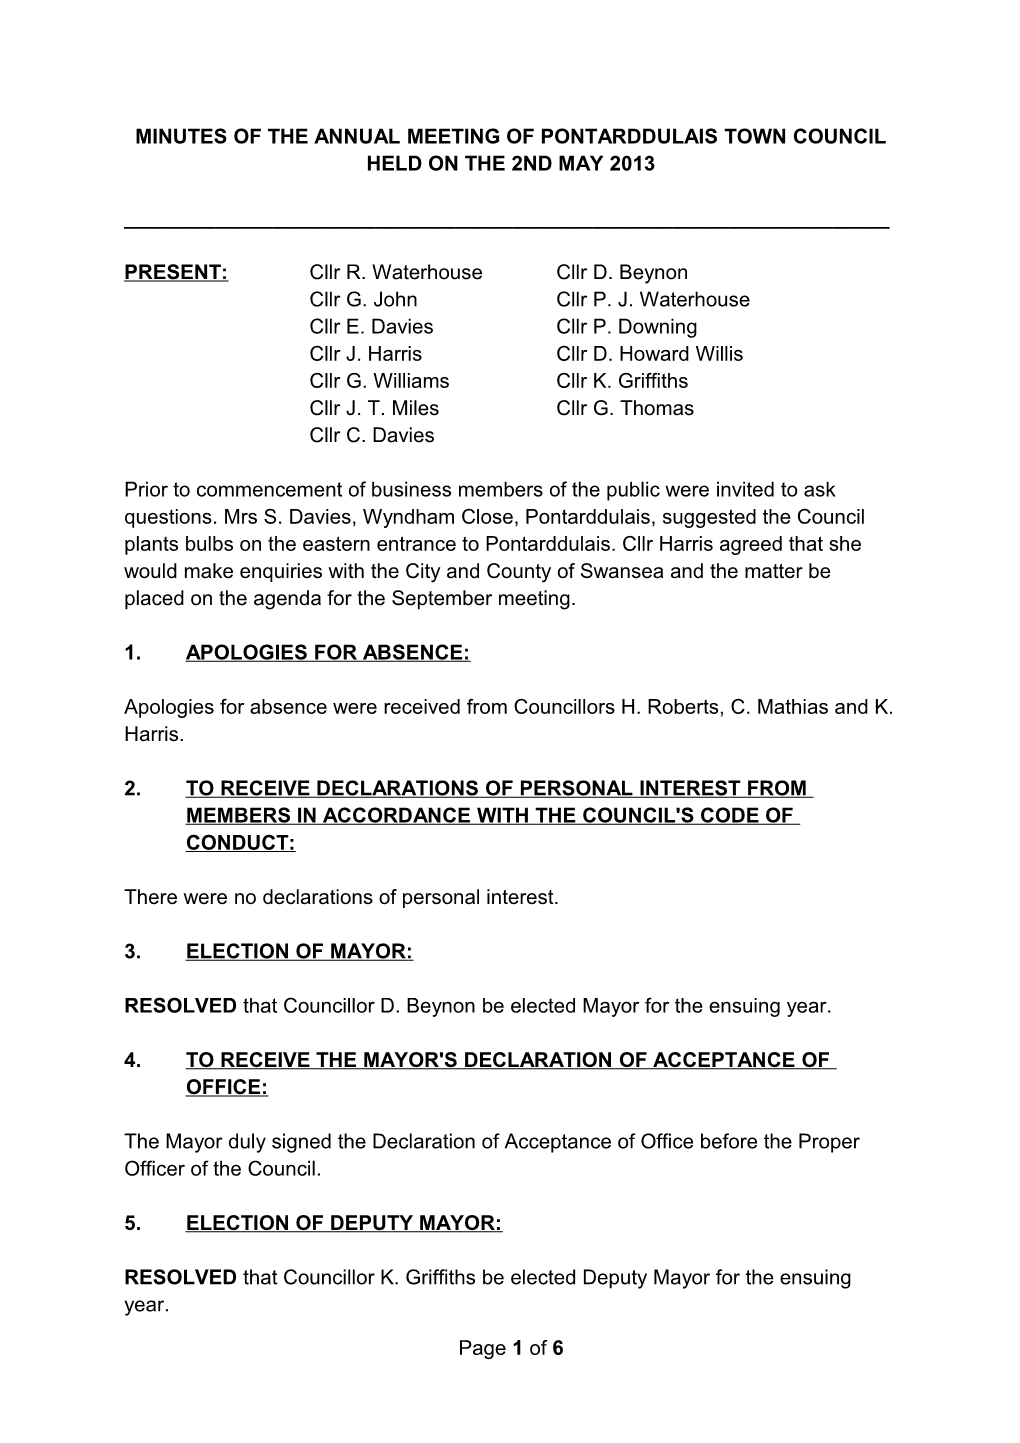 Minutes of the Annual Meeting of Pontarddulais Town Council Held on the 2Nd May 2013